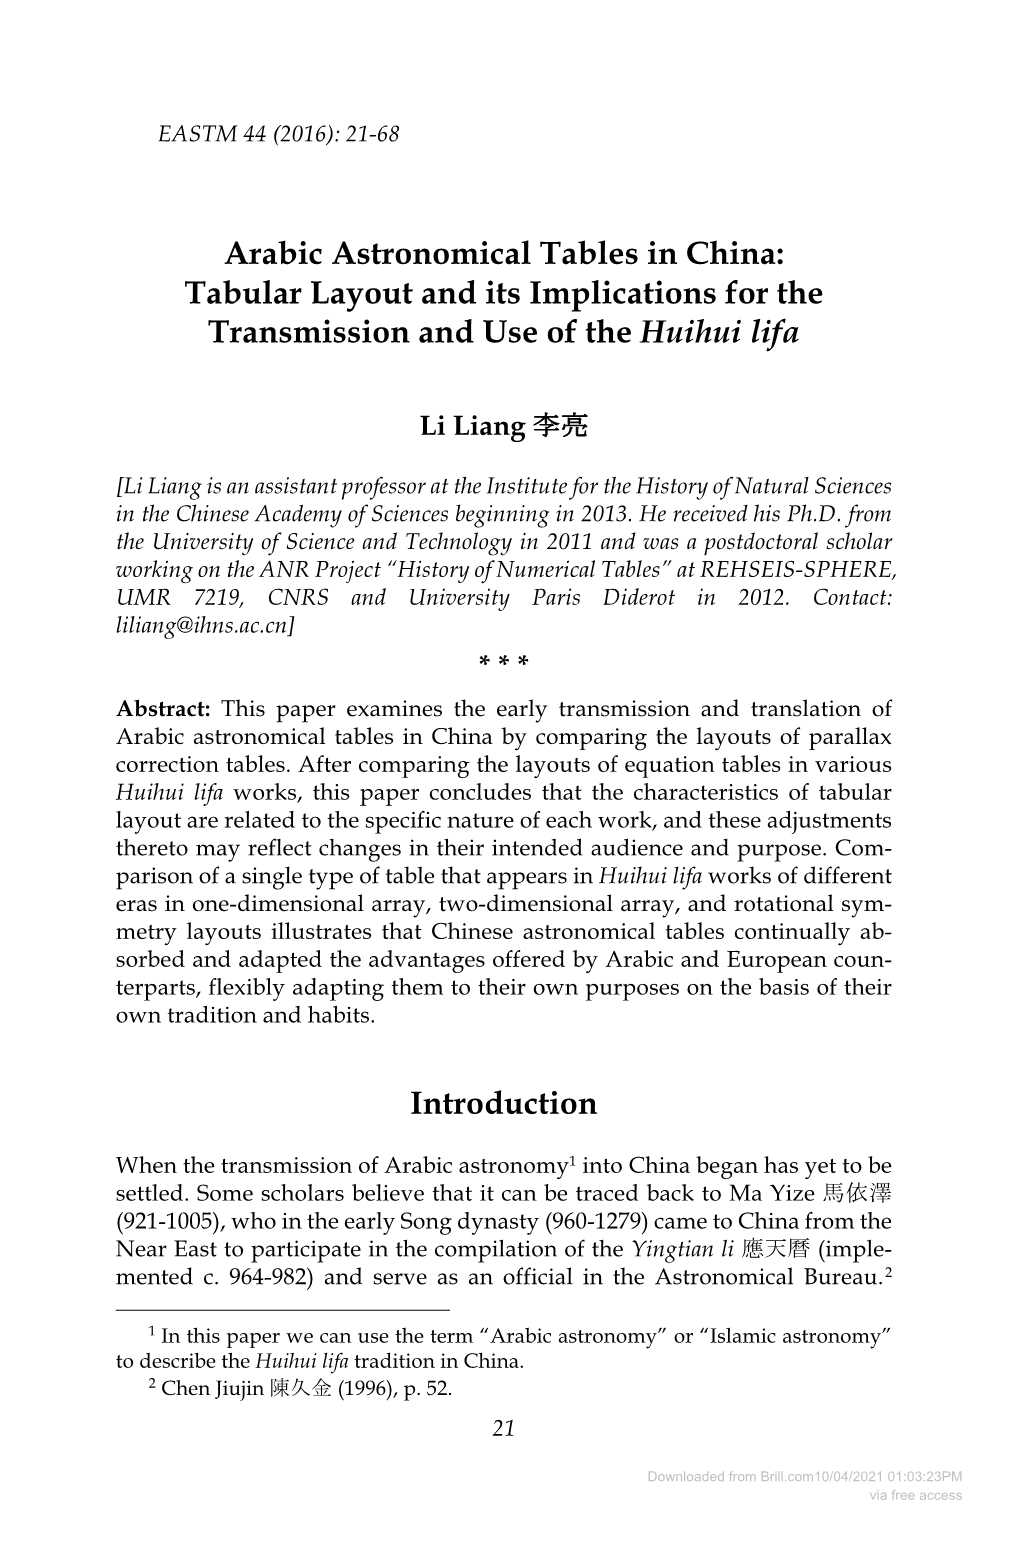 Arabic Astronomical Tables in China: Tabular Layout and Its Implications for the Transmission and Use of the Huihui Lifa